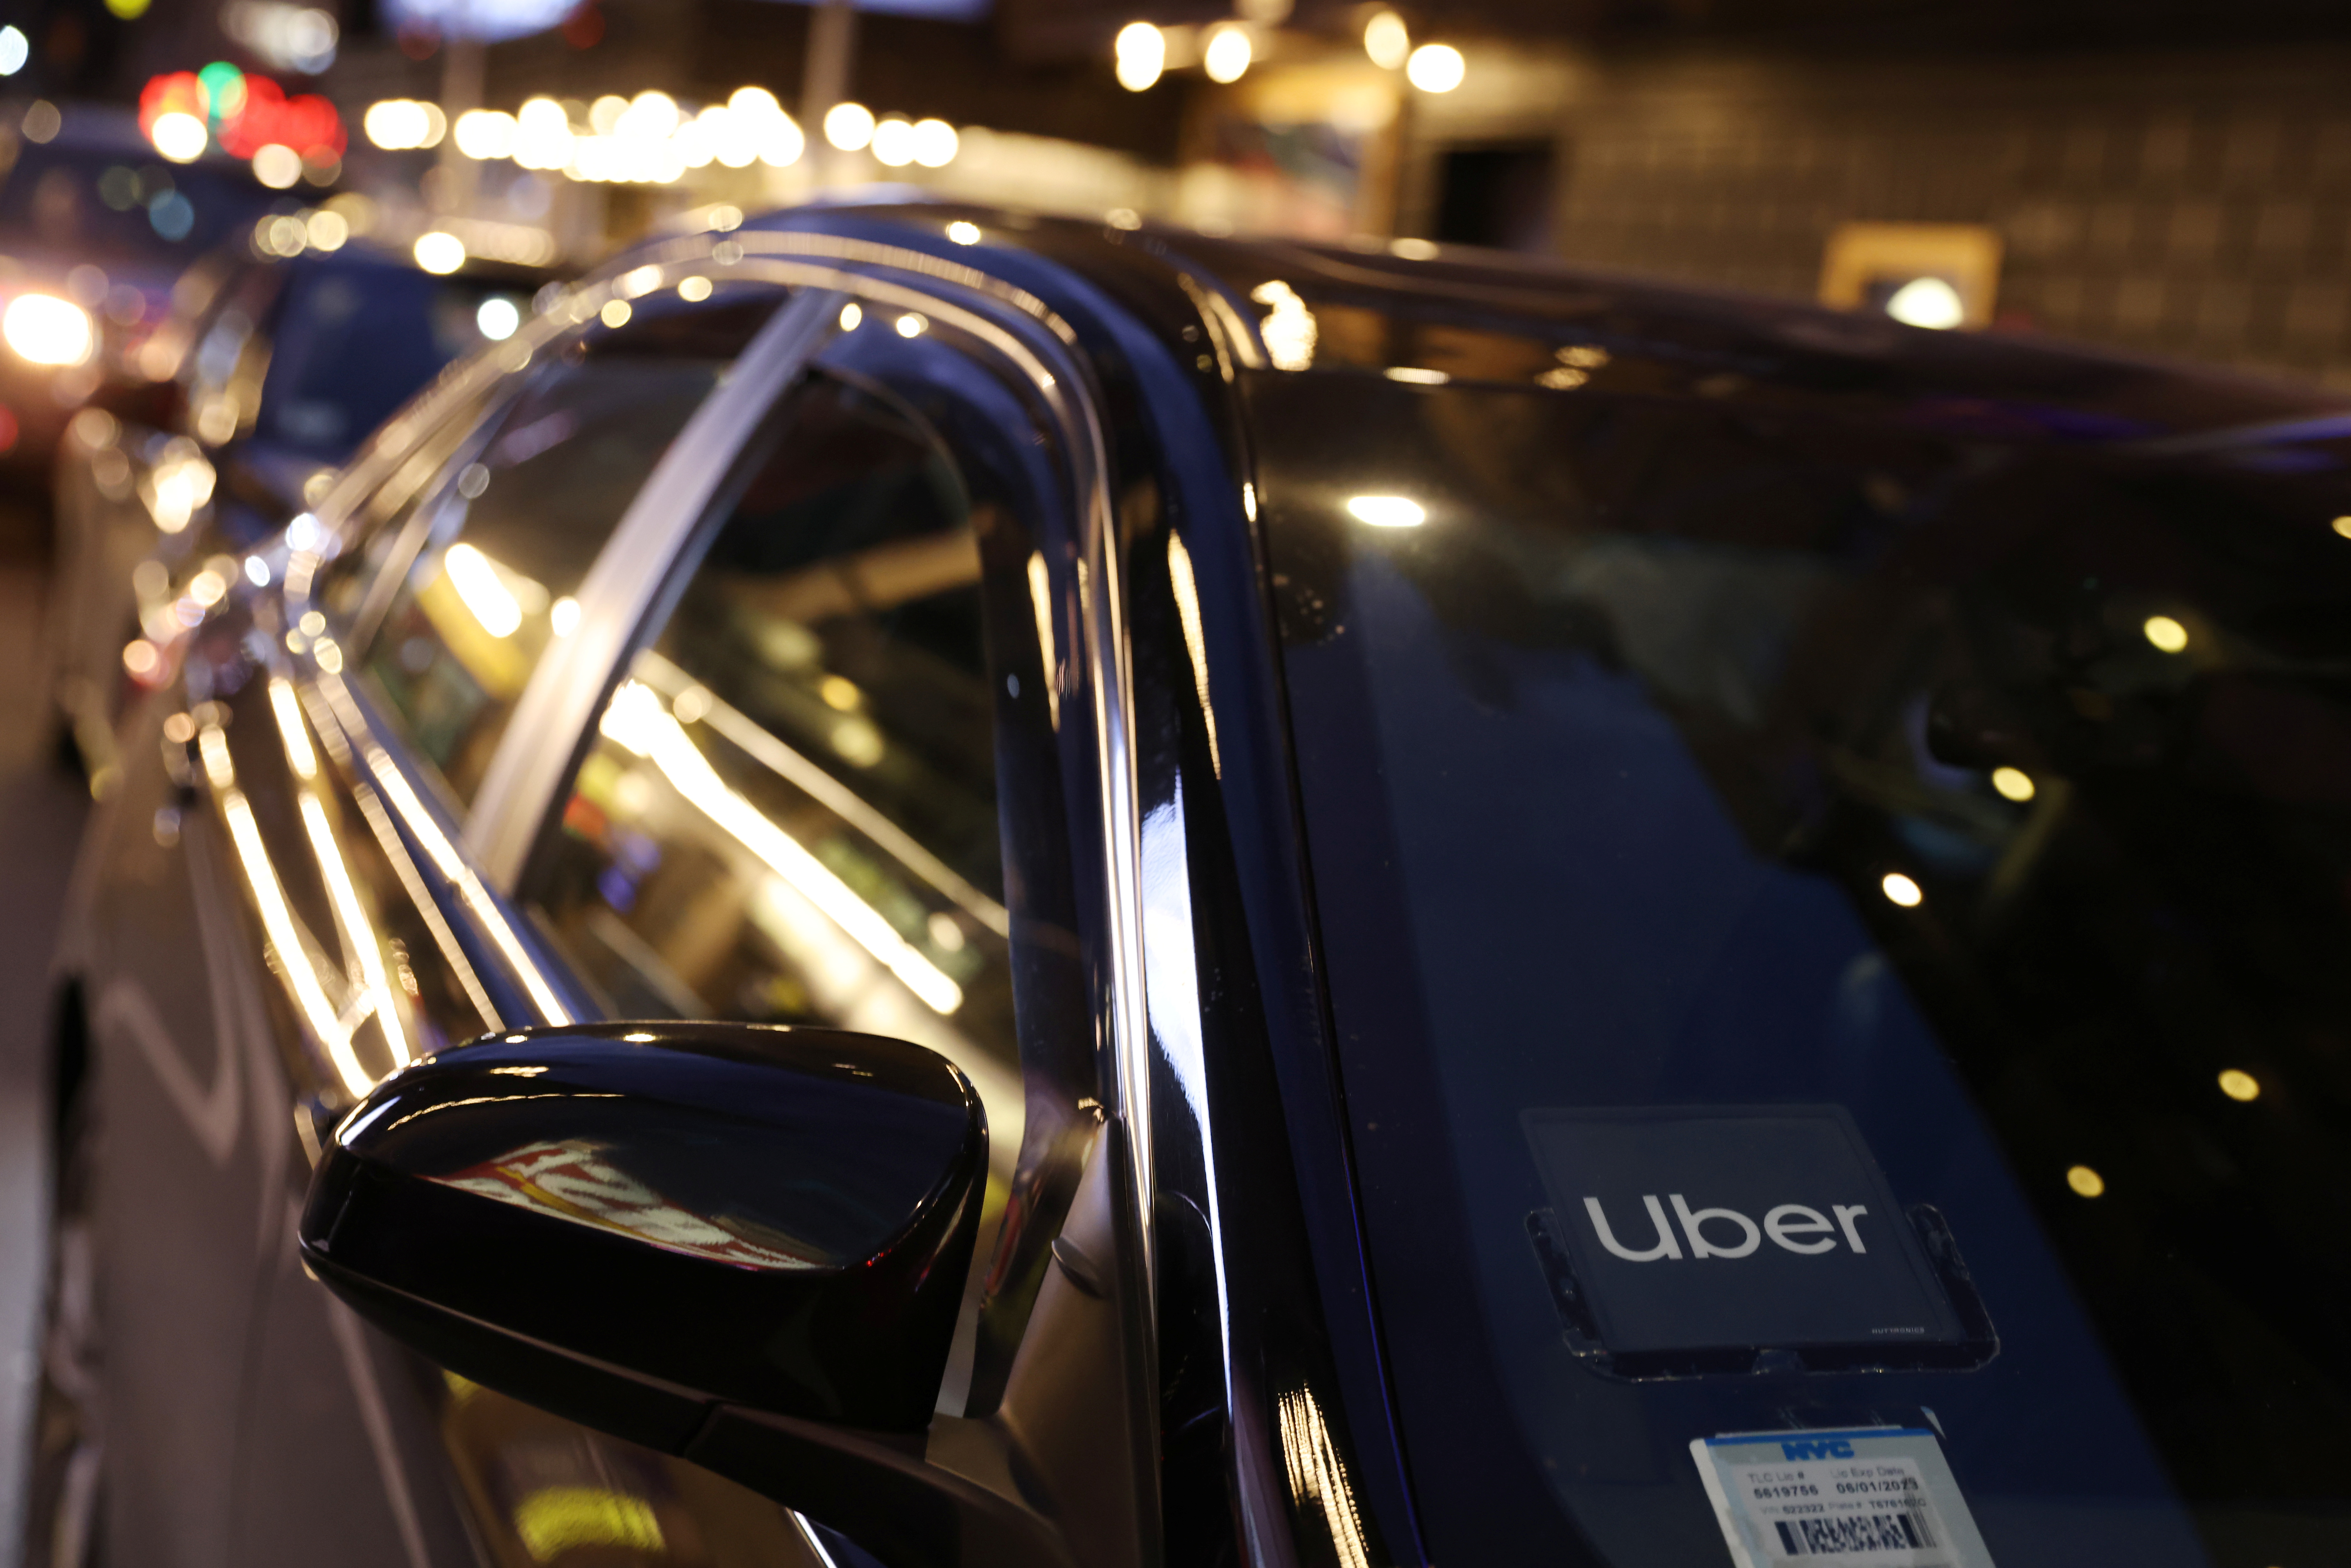 Uber and Lyft criticized for surge pricing after NYC subway shooting